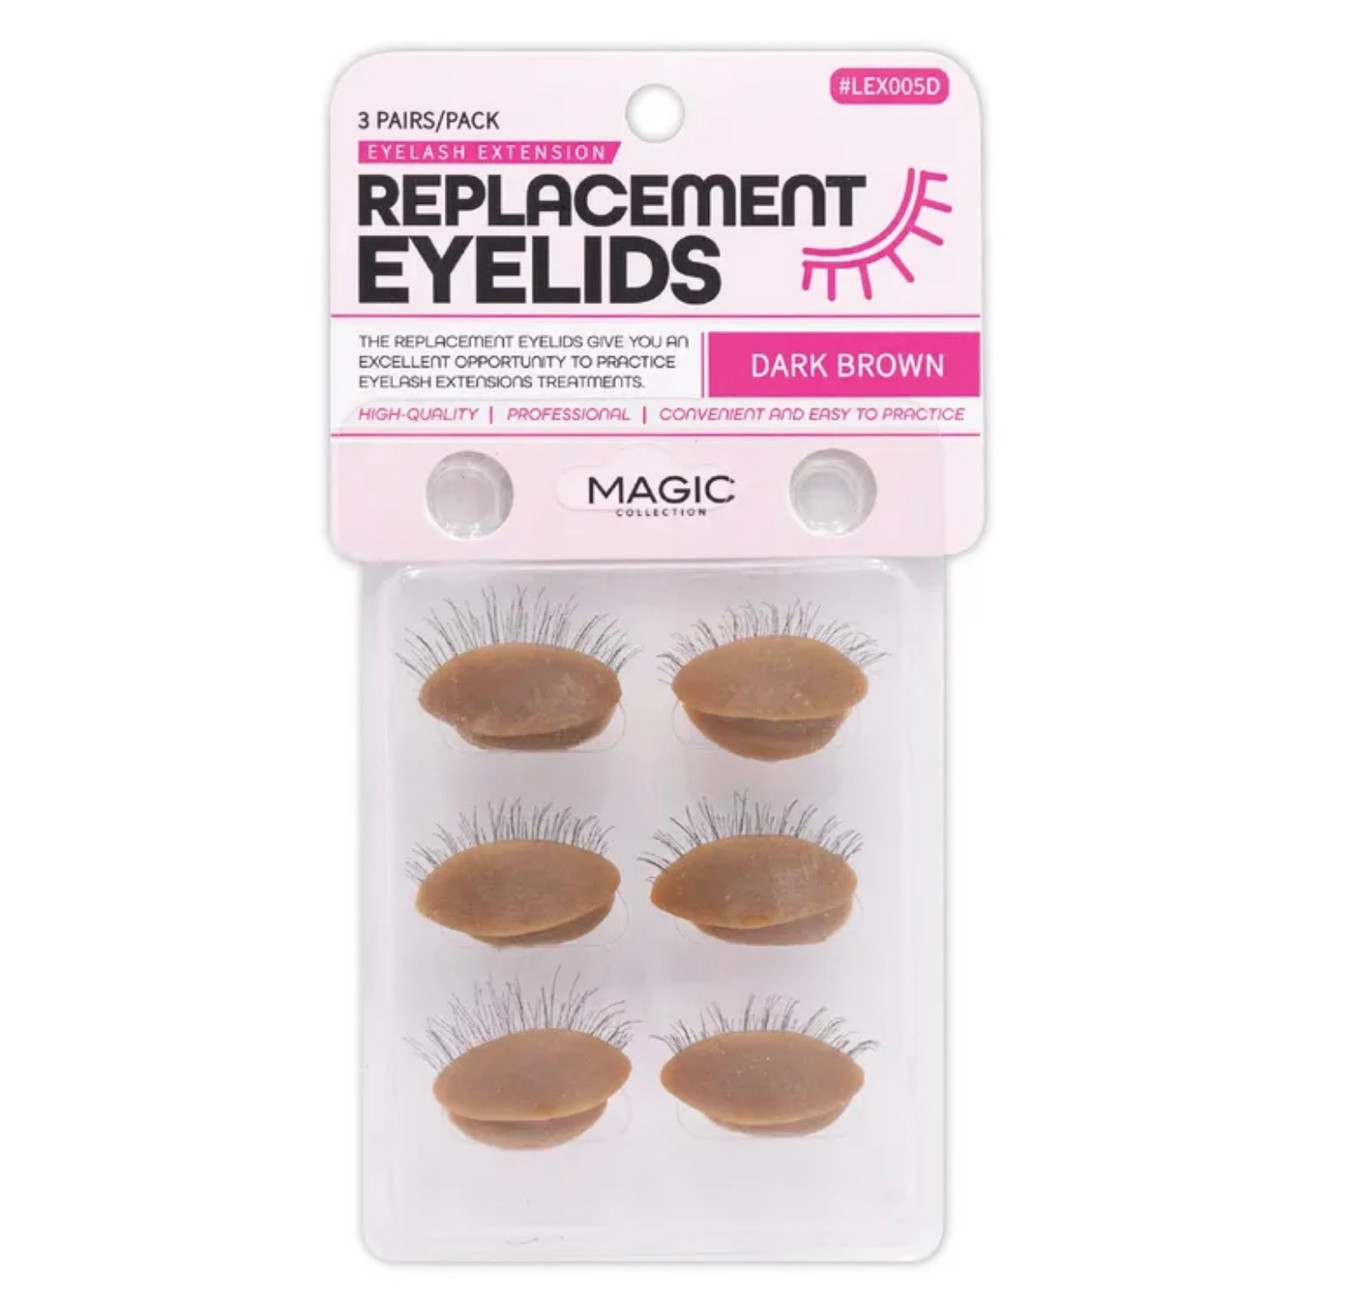 Magic Collection Replacement Eyelids